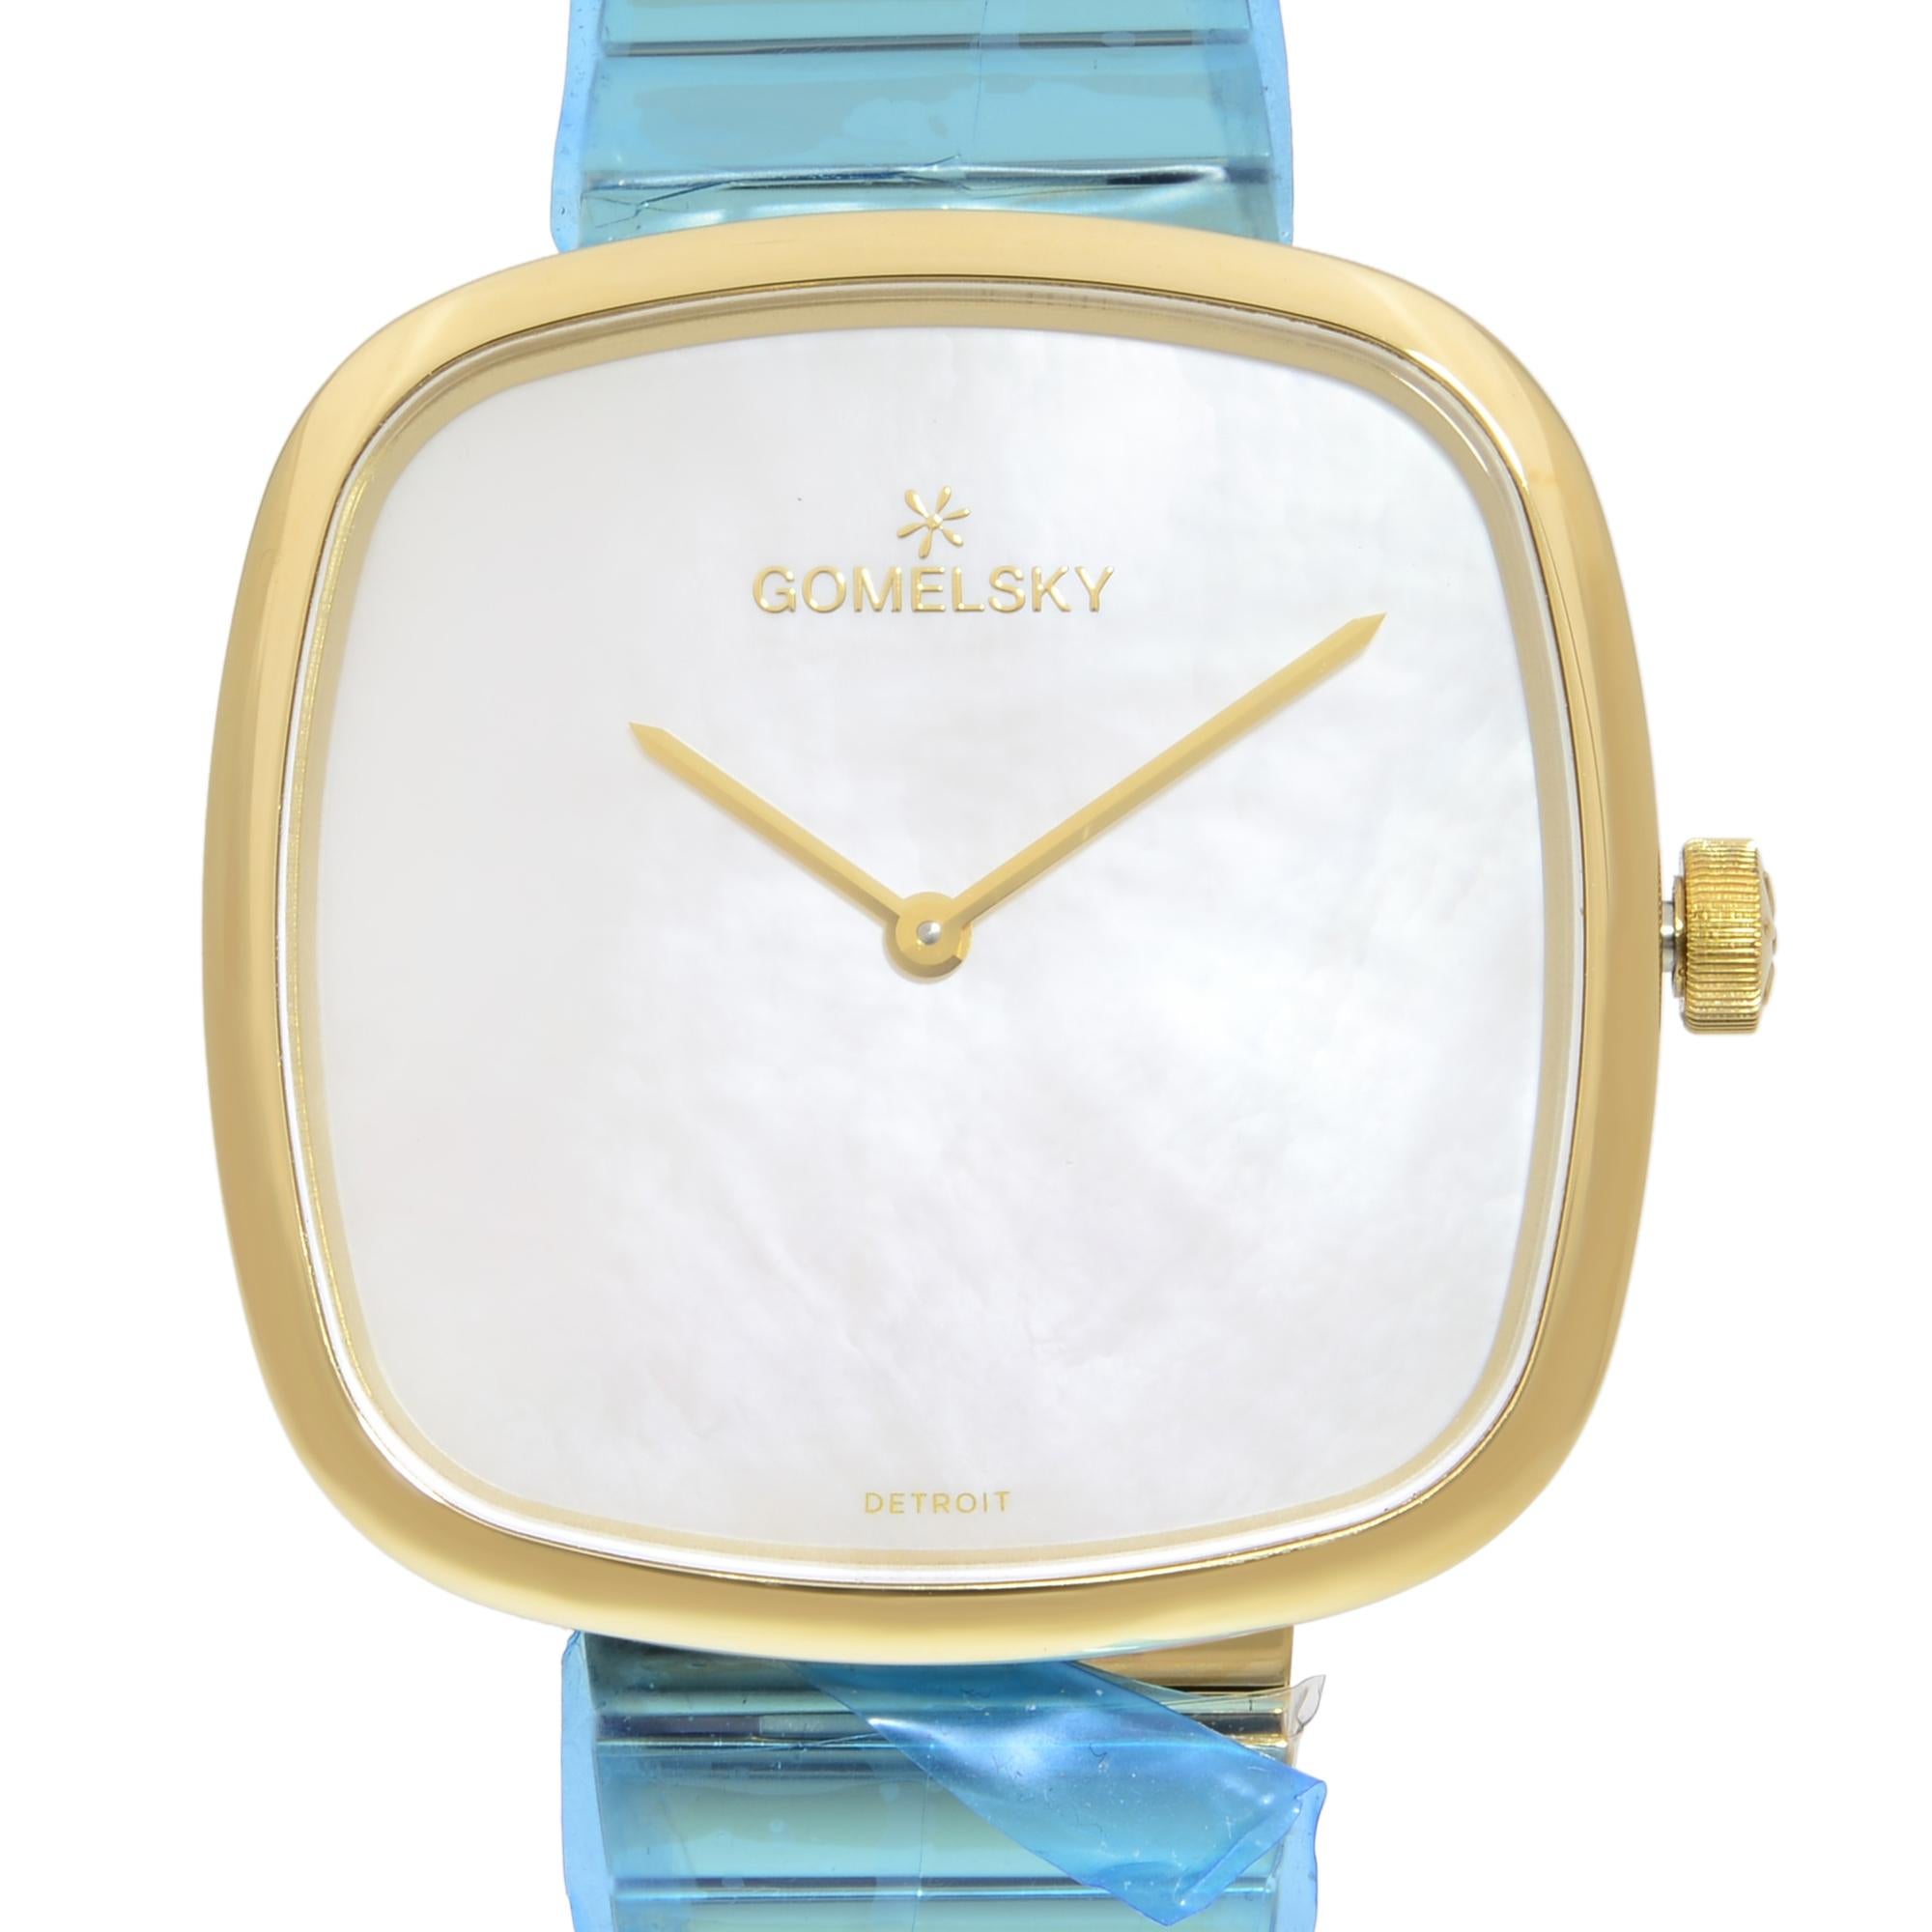 This brand new Gomelsky Eppie Sneed  G0120089478 is a beautiful Ladie's timepiece that is powered by quartz (battery) movement which is cased in a stainless steel case. It has a  rectangle shape face,  dial and has hand unspecified style markers. It